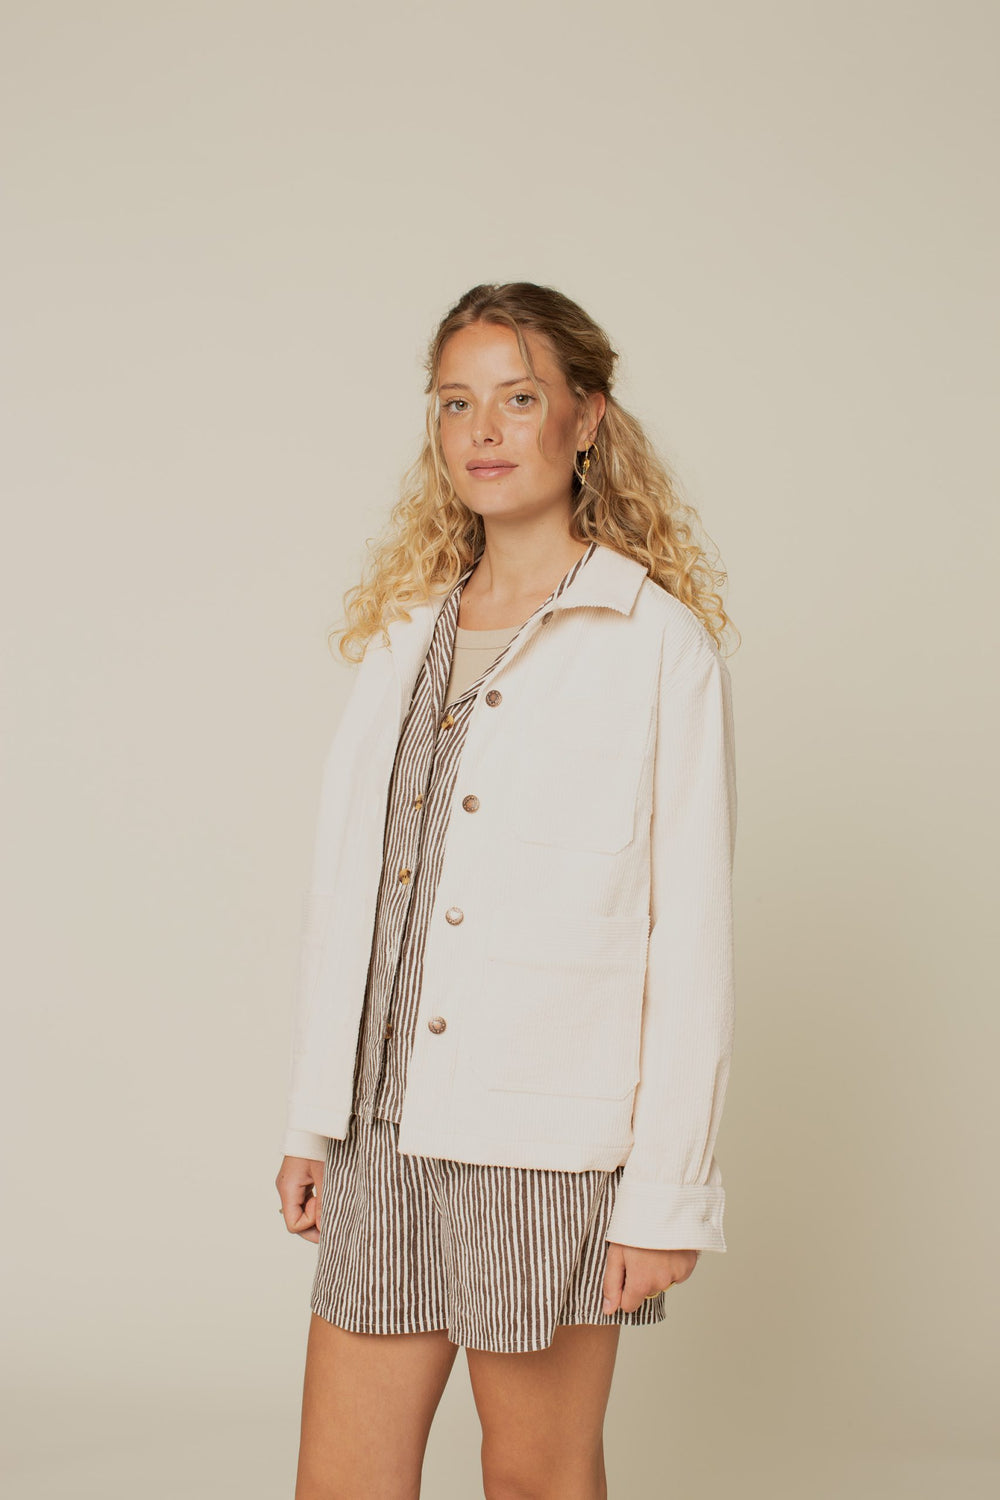 Woman wearing the Canvas Jacket sewing pattern from Wardrobe by Me on The Fold Line. A jacket pattern made in cotton, linen or wool fabrics, featuring a boxy fit, two-piece full length sleeves with button cuffs, three front patch pockets, shirt collar, bu